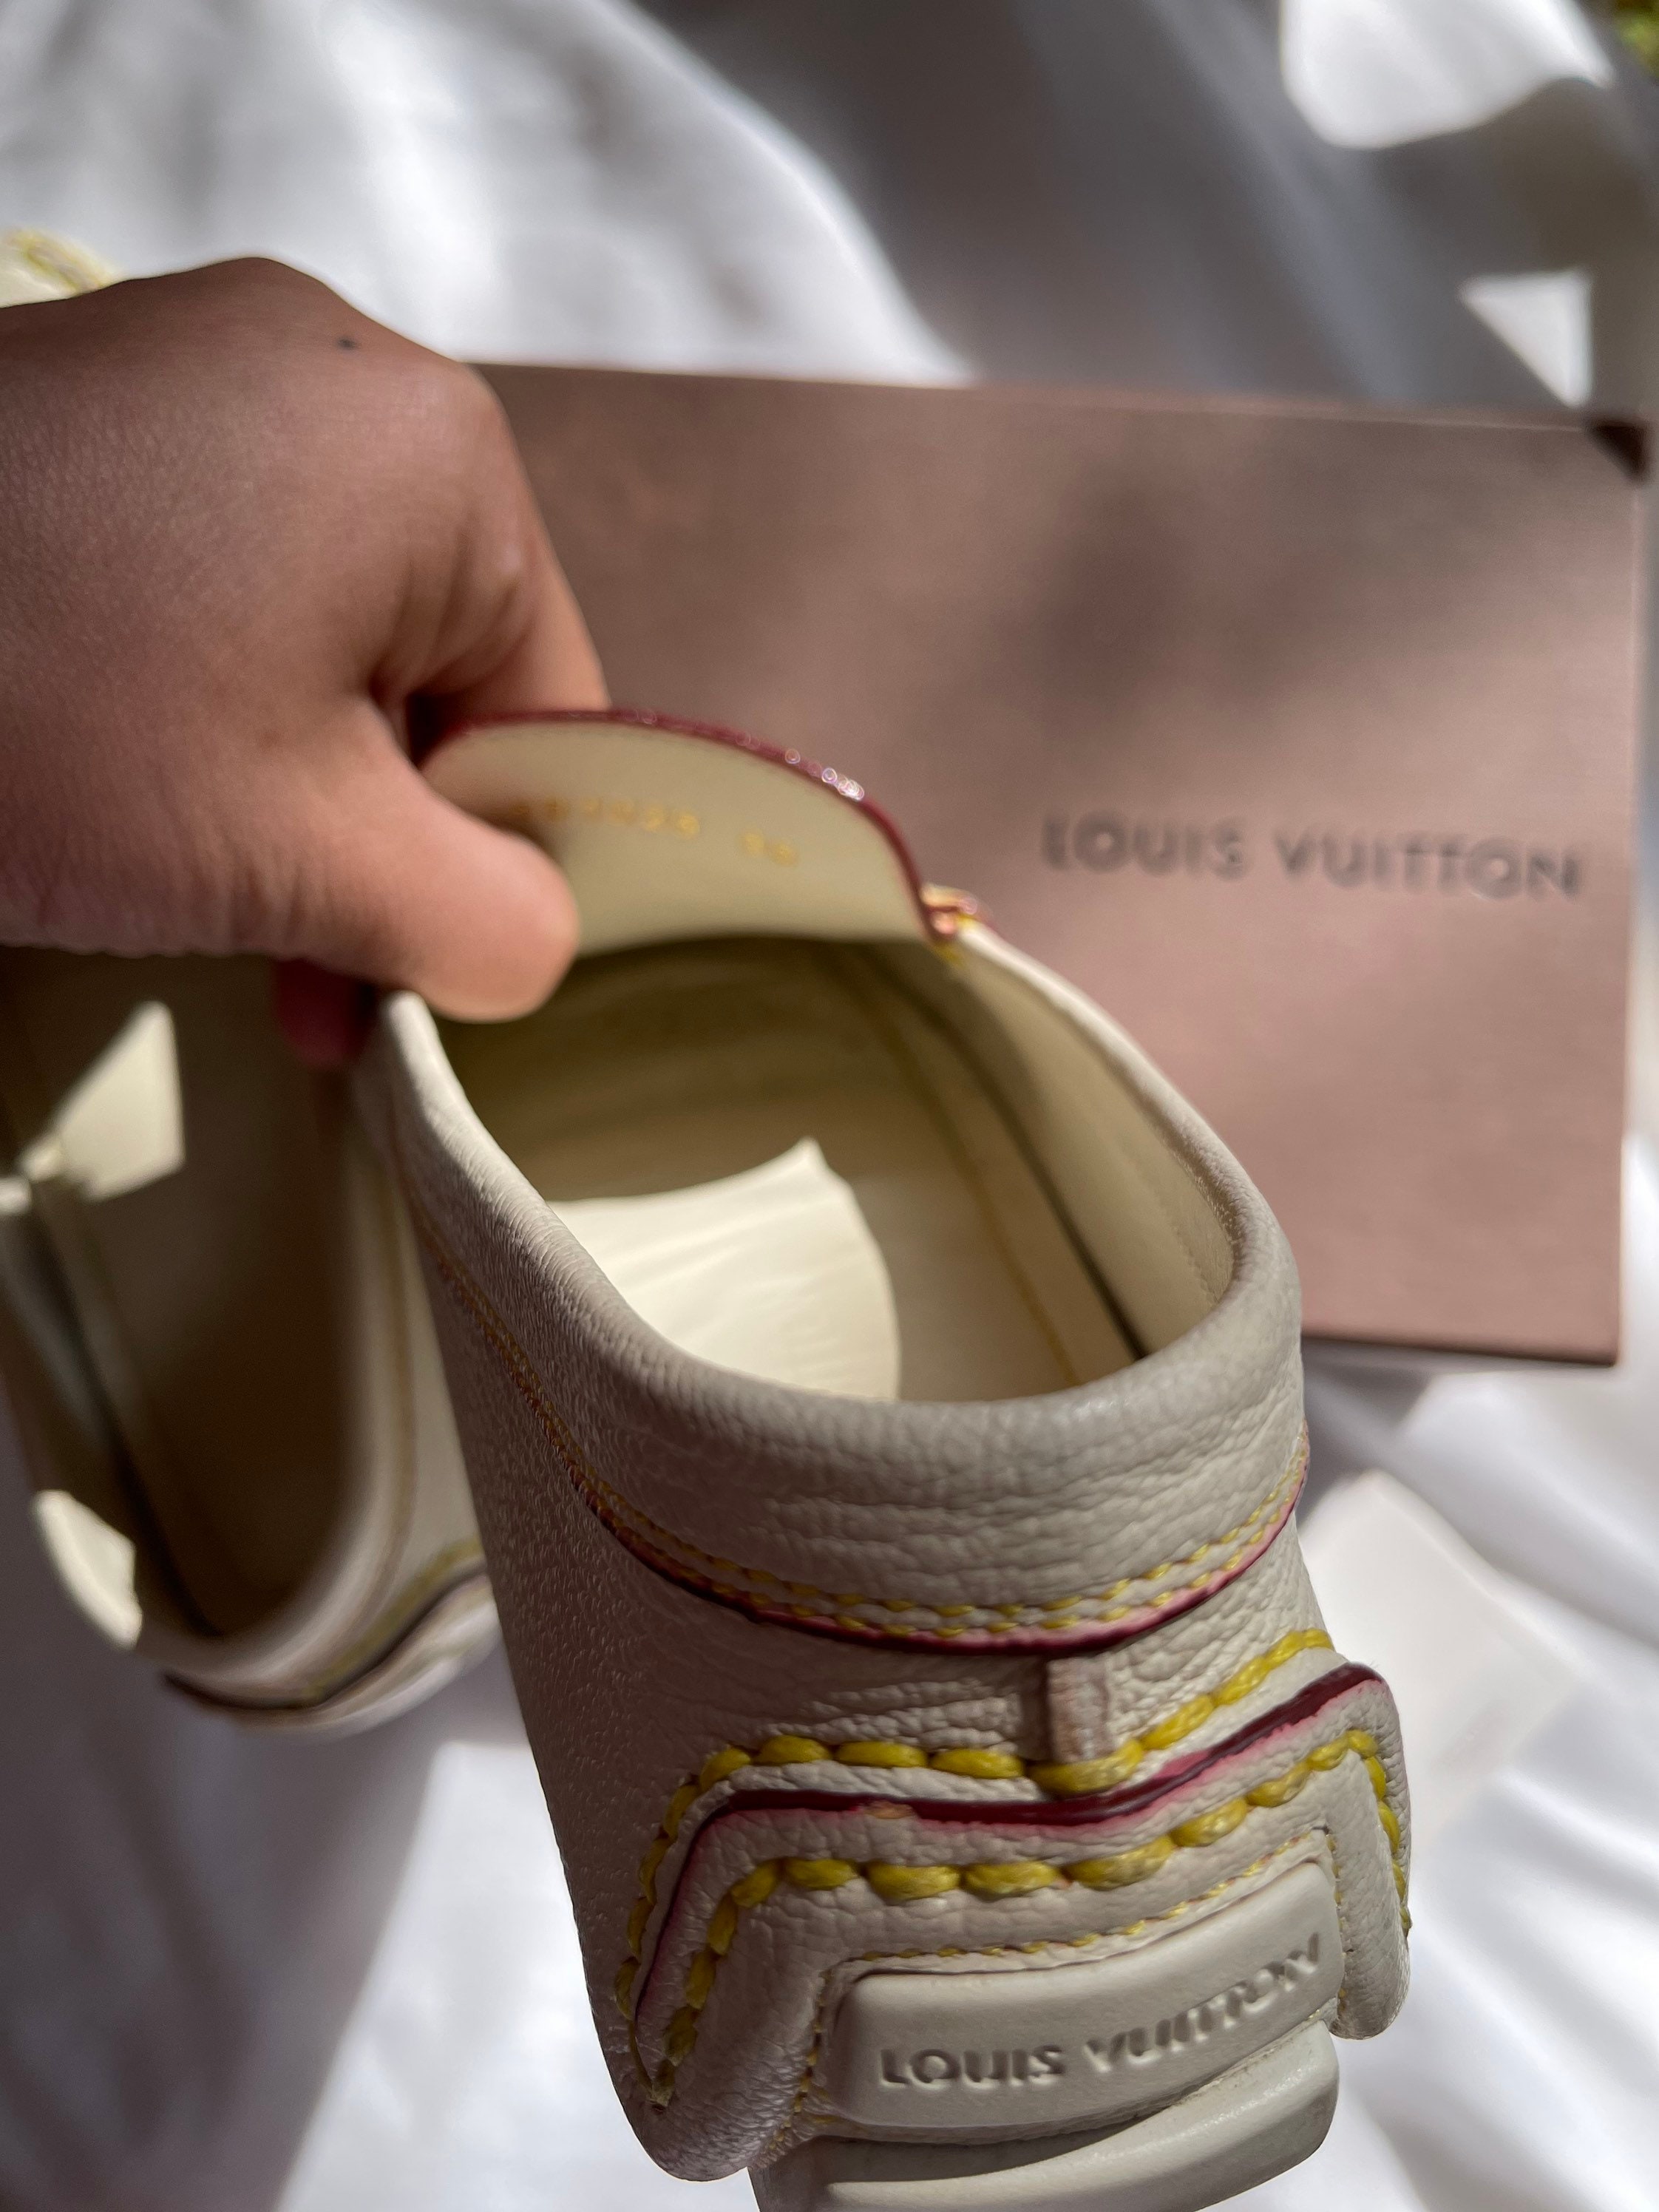 vuitton baby shoes